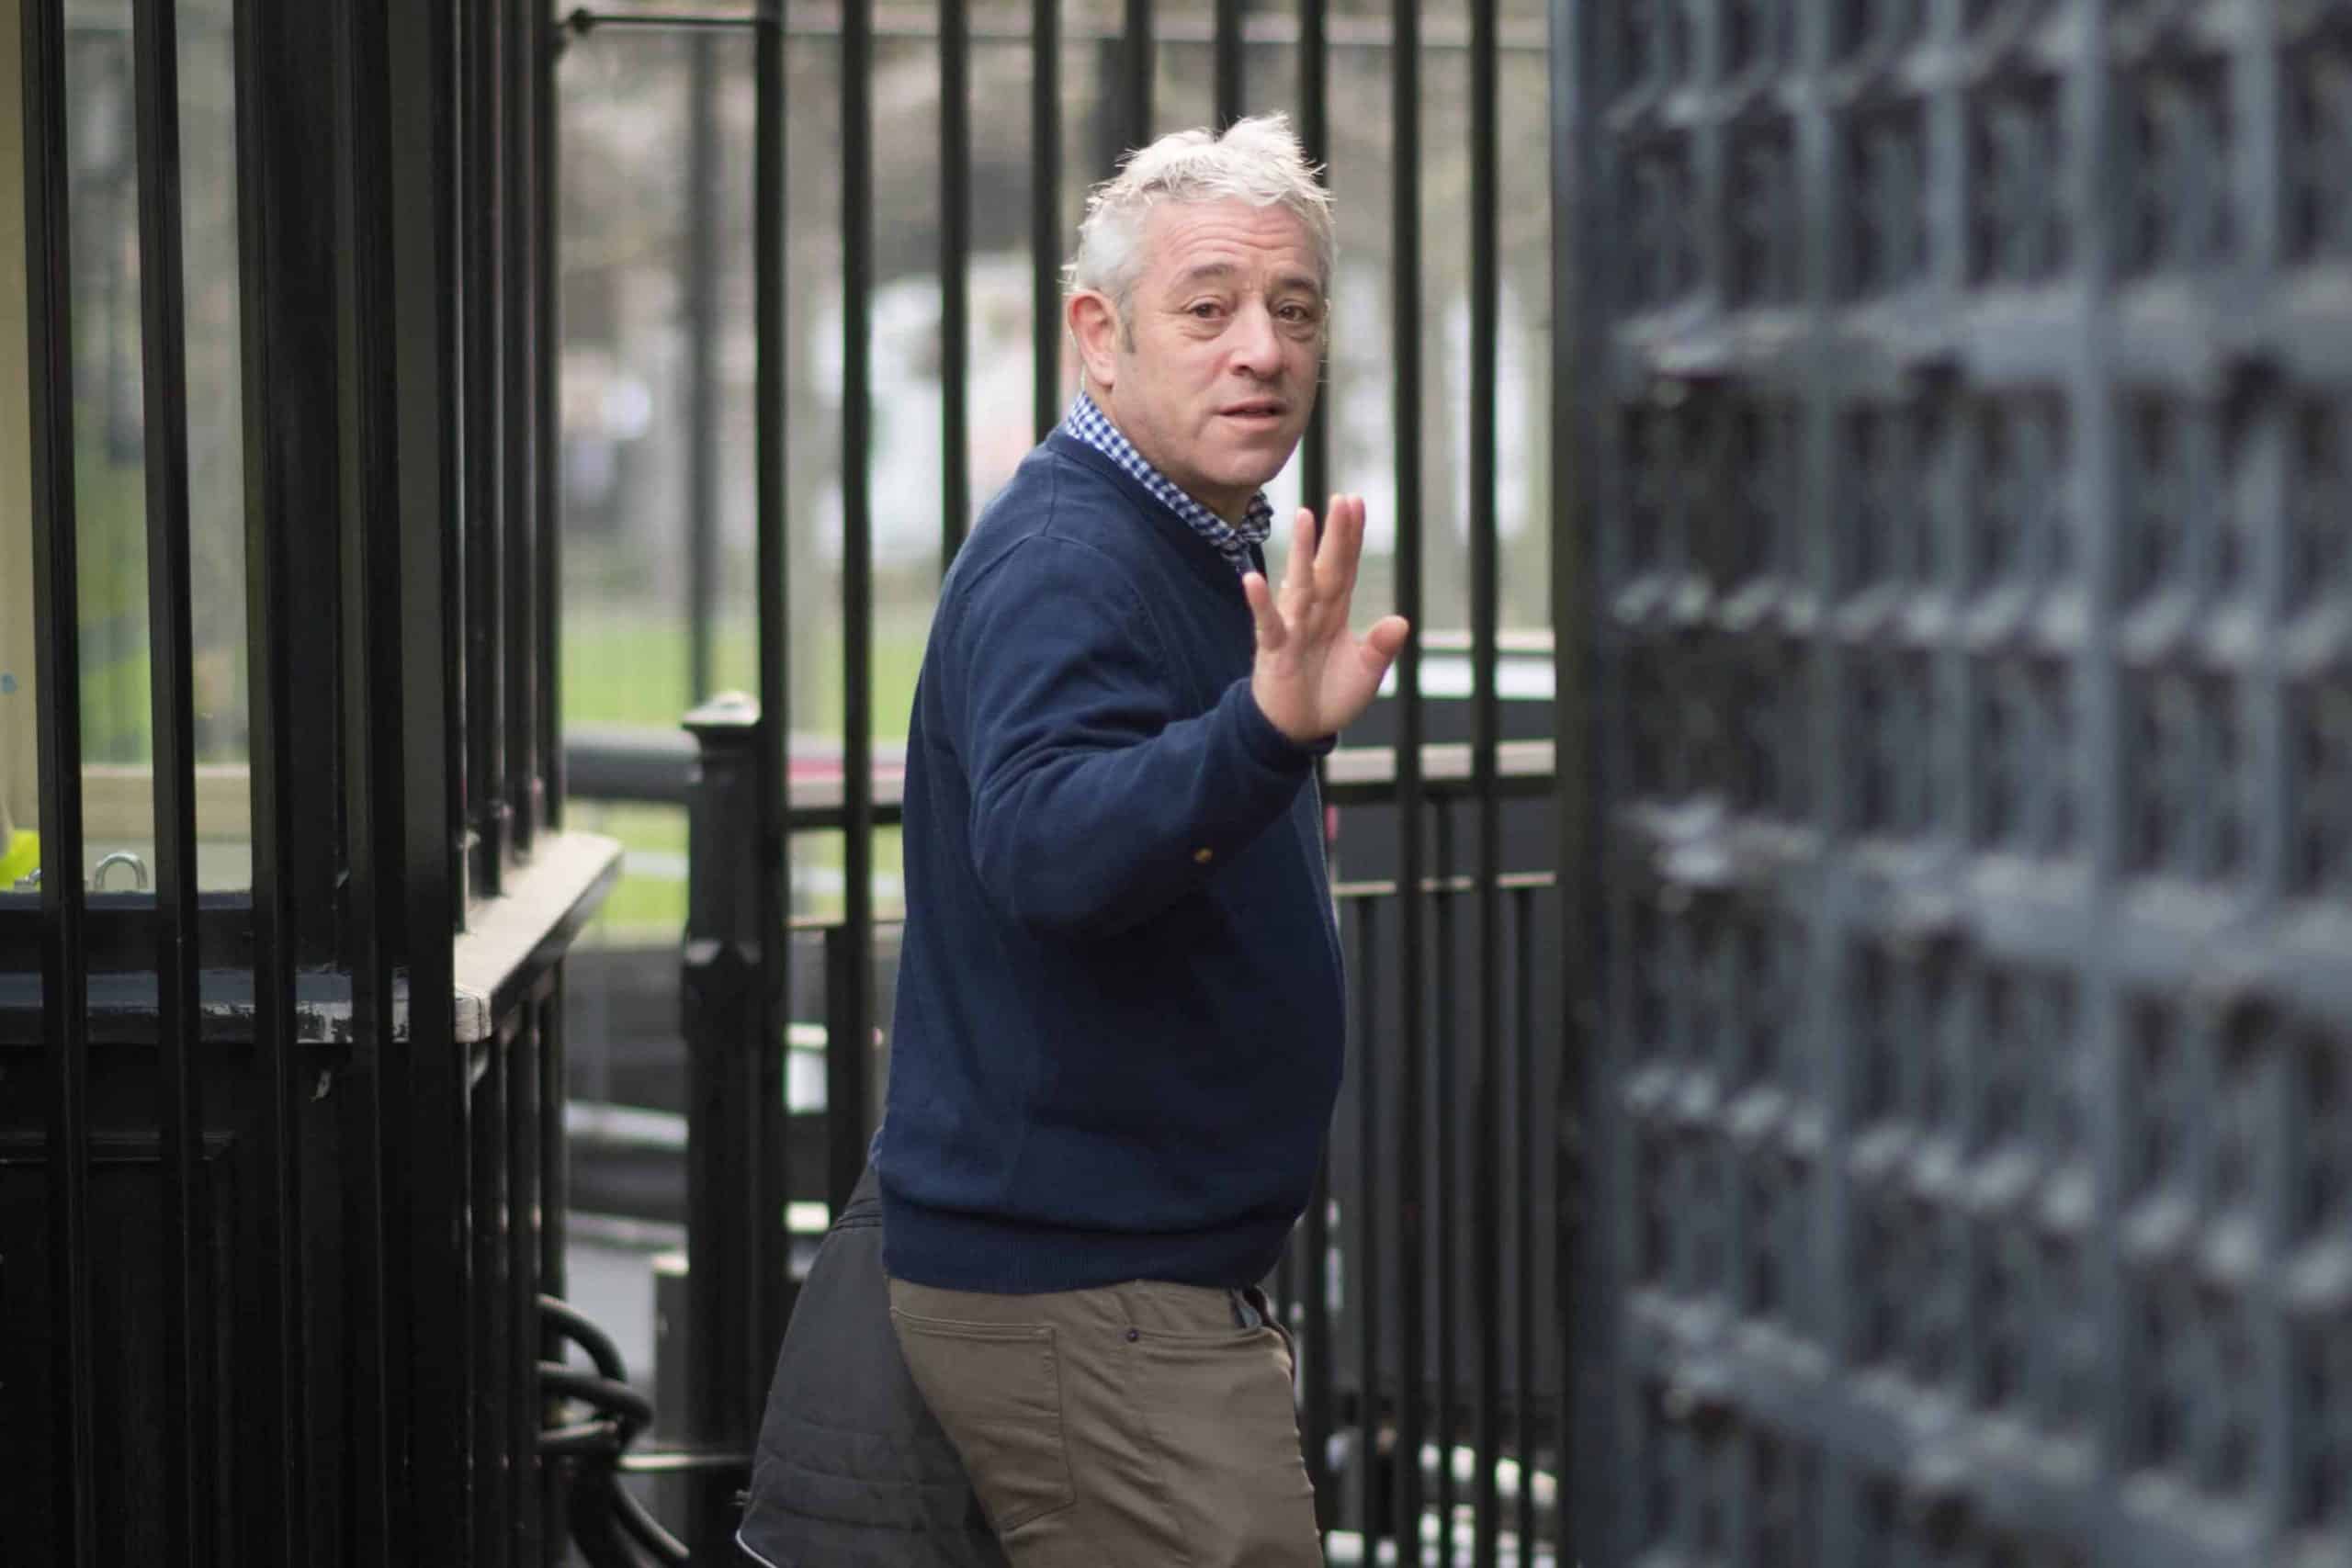 Bercow suggests ‘conspiracy’ in play to deny him a peerage